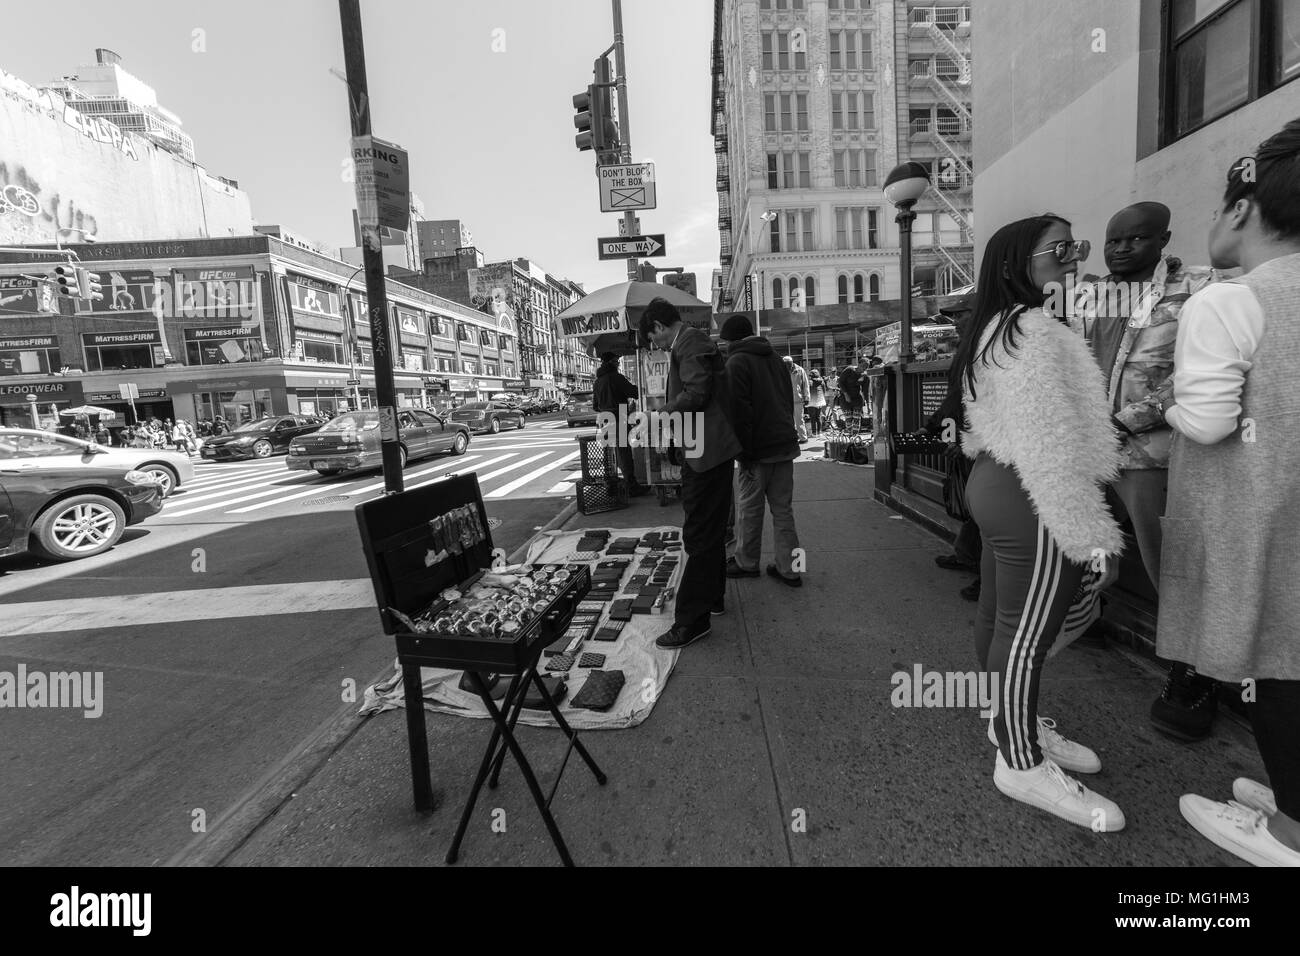 Street shot of people selling purses and watches, NYC Manhattan Stock Photo